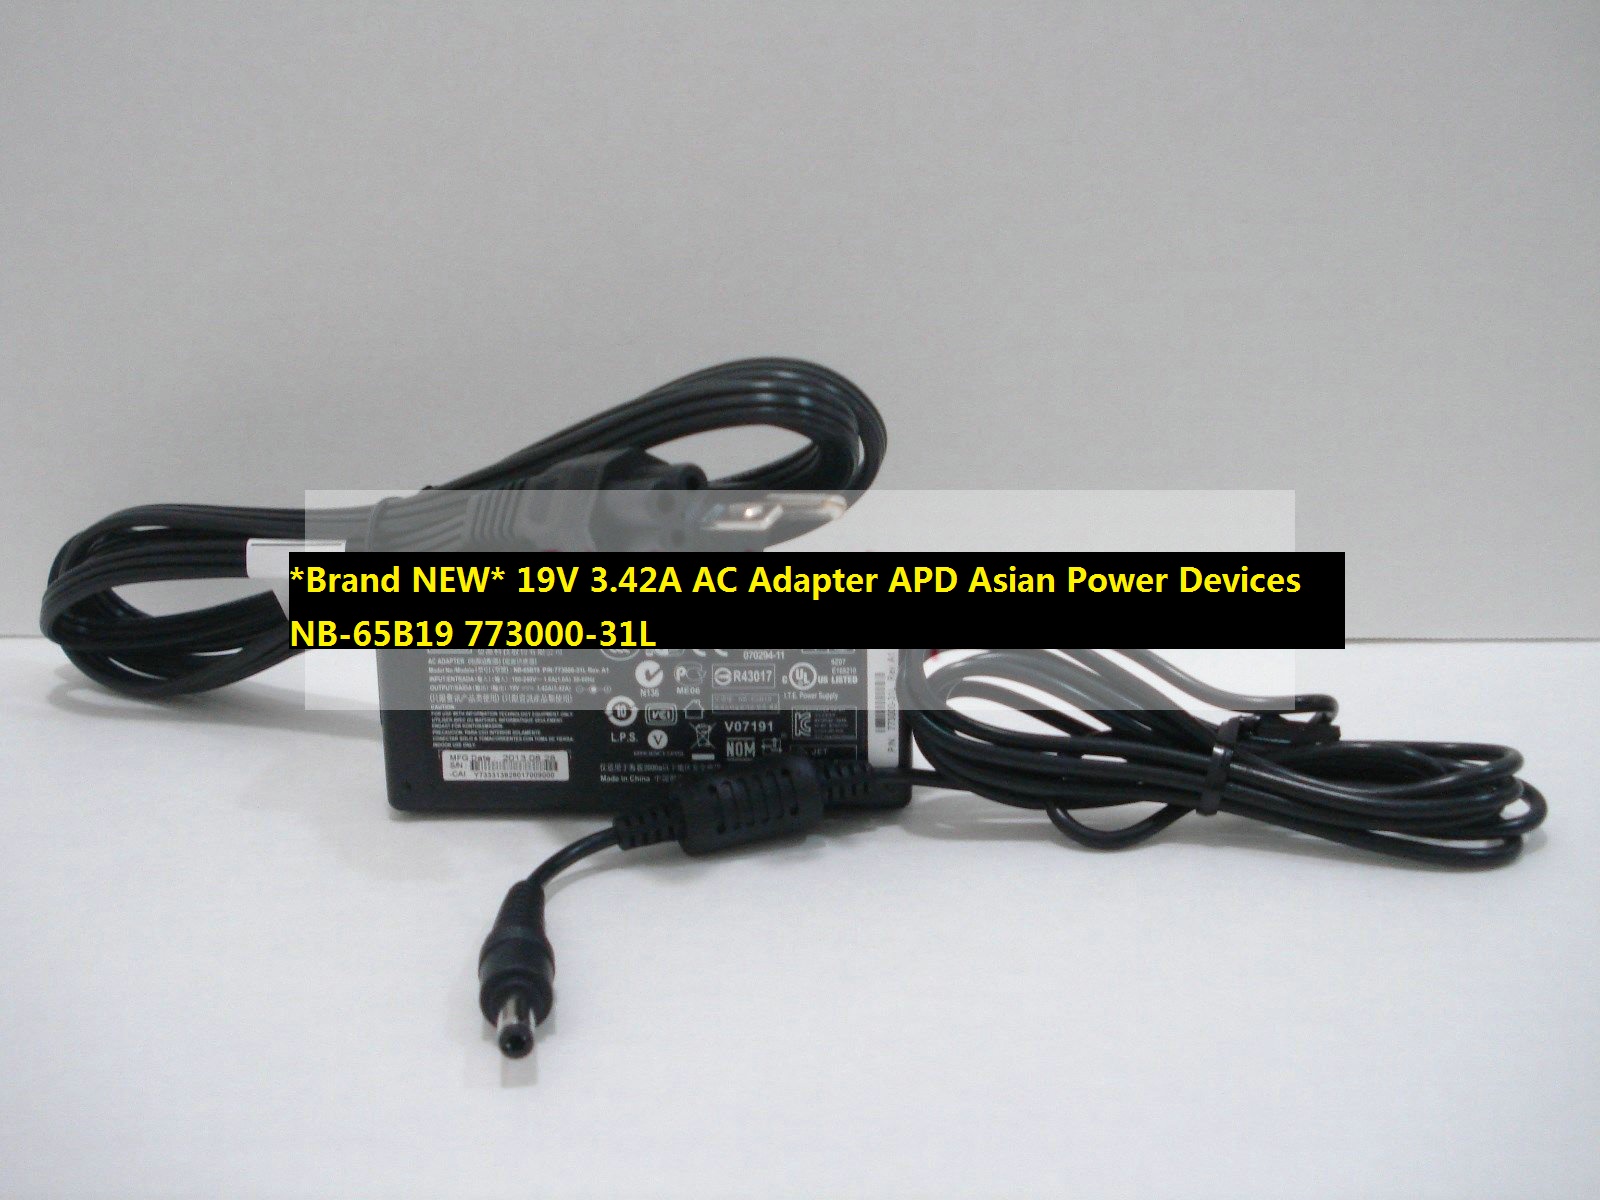 *Brand NEW* 19V 3.42A AC Adapter APD Asian Power Devices NB-65B19 773000-31L